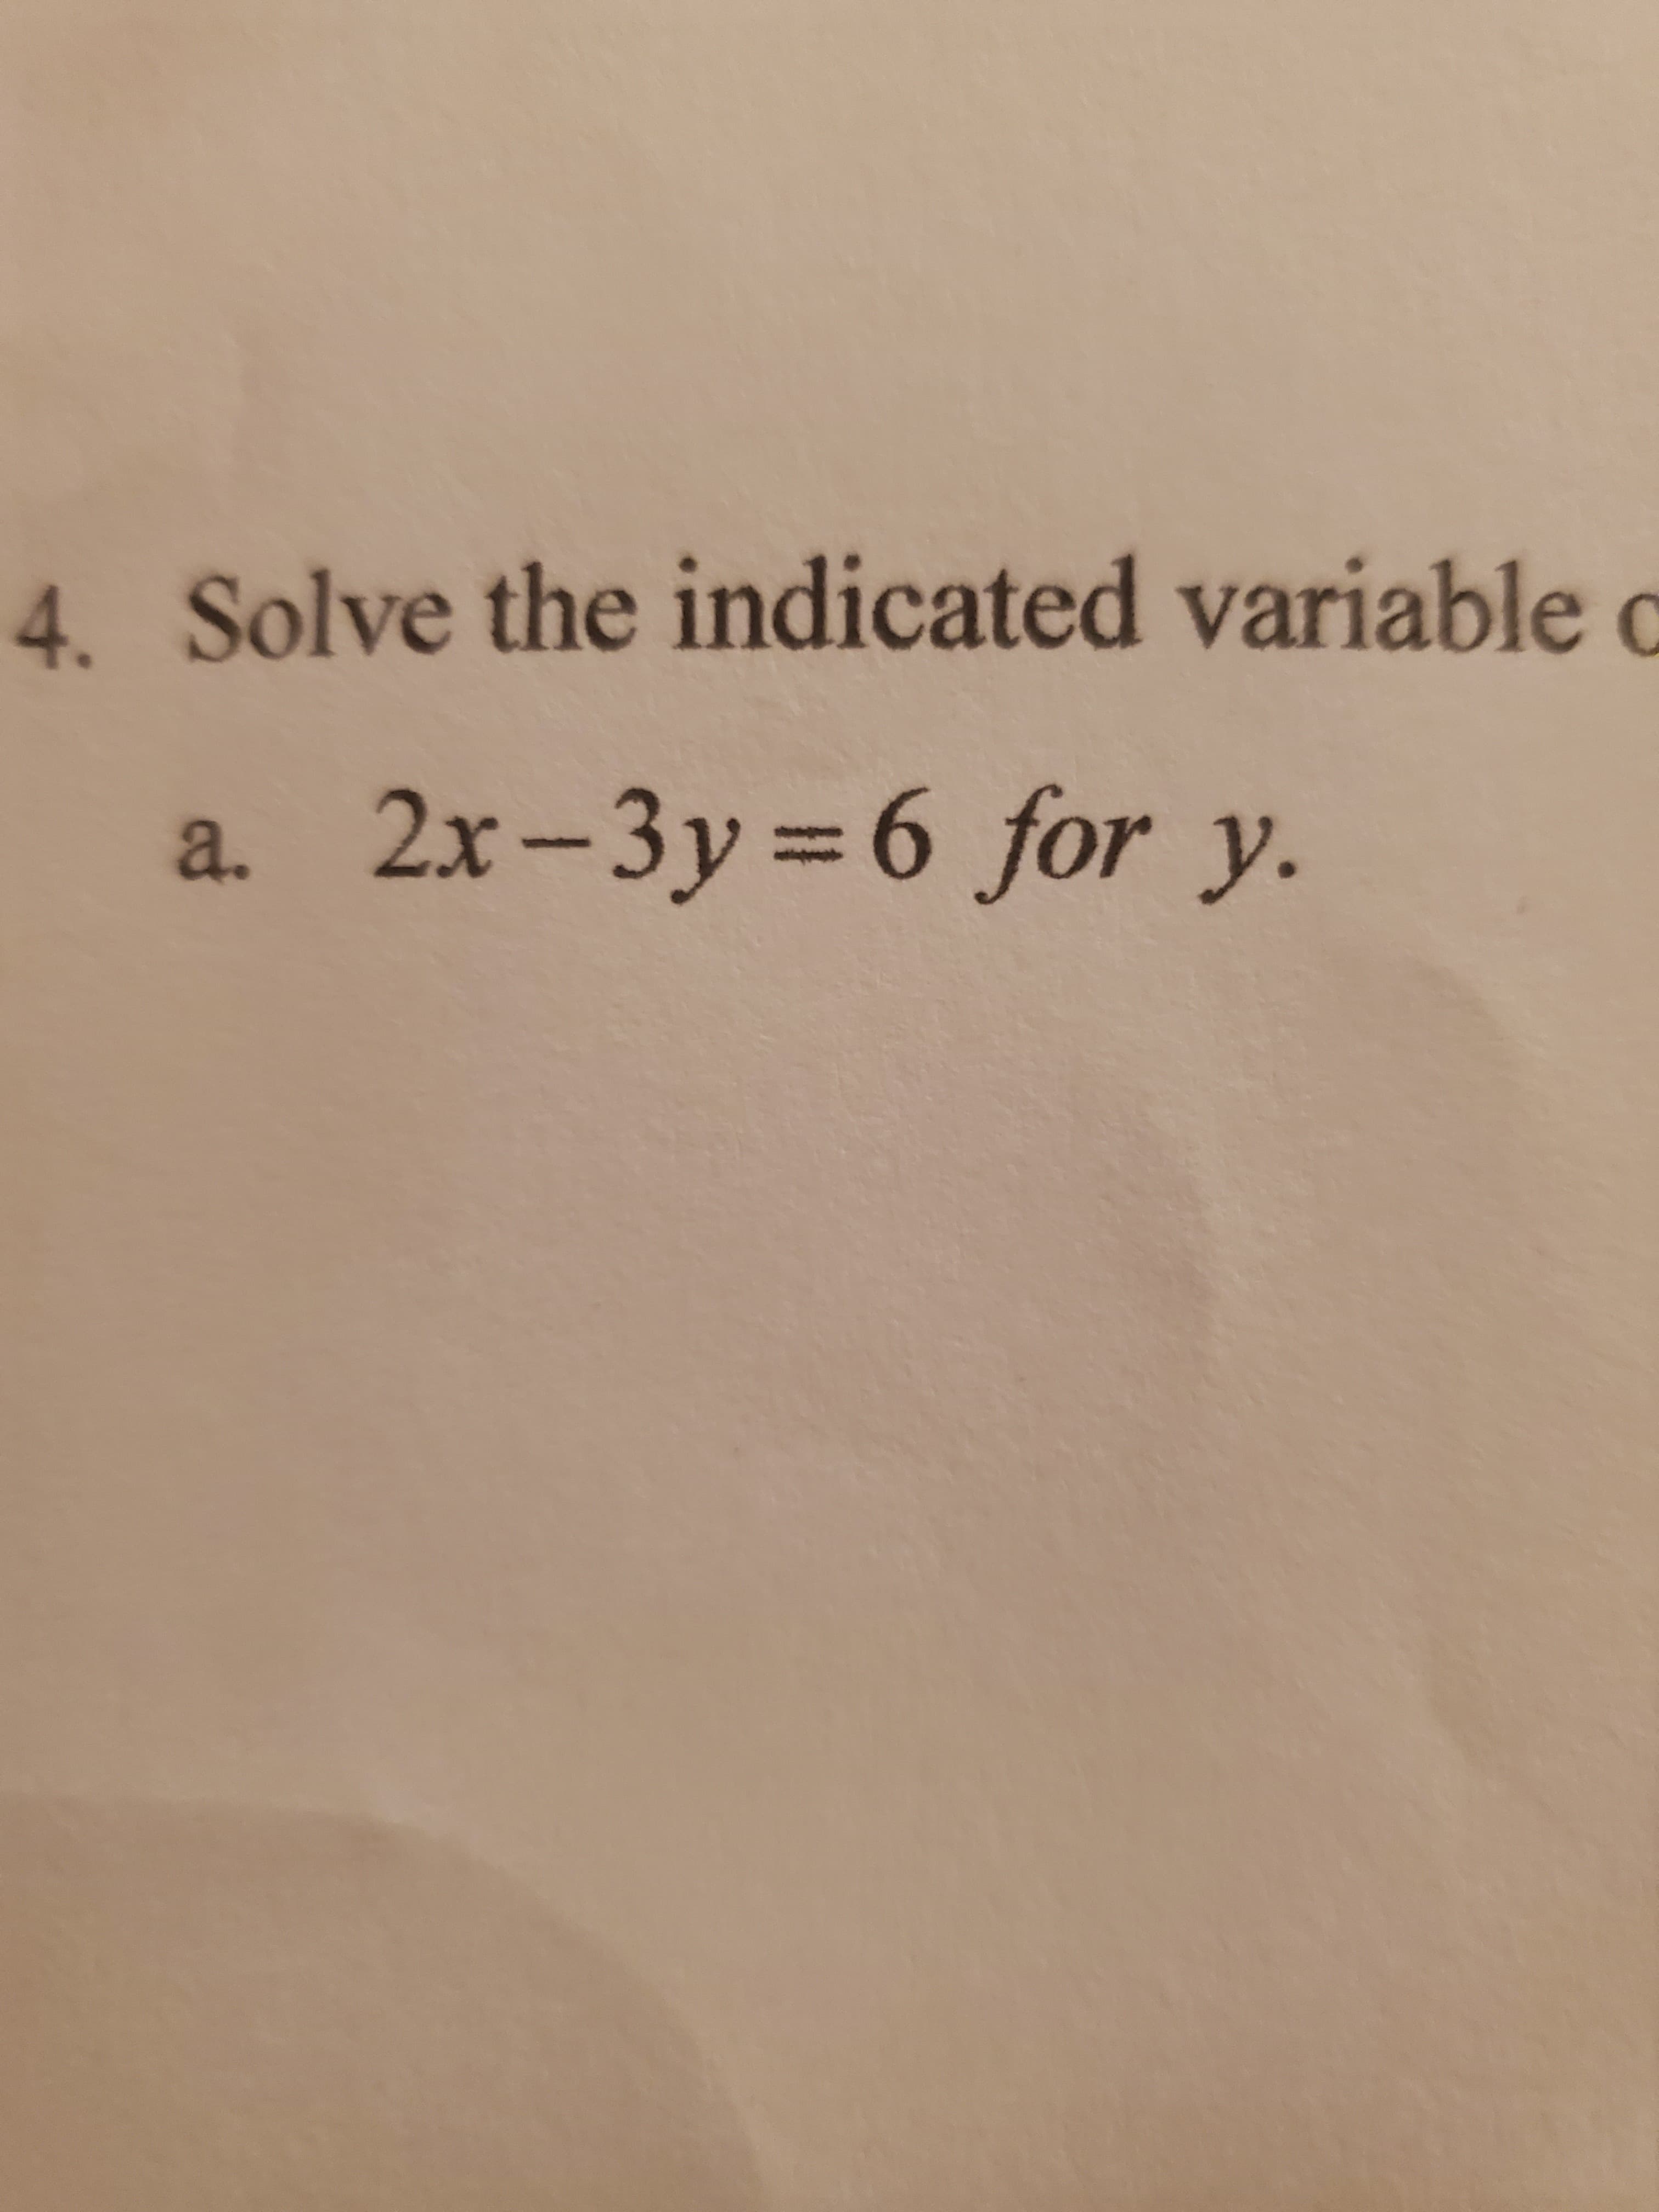 Solve the indicated variable
a. 2x-3y 6 for y.
